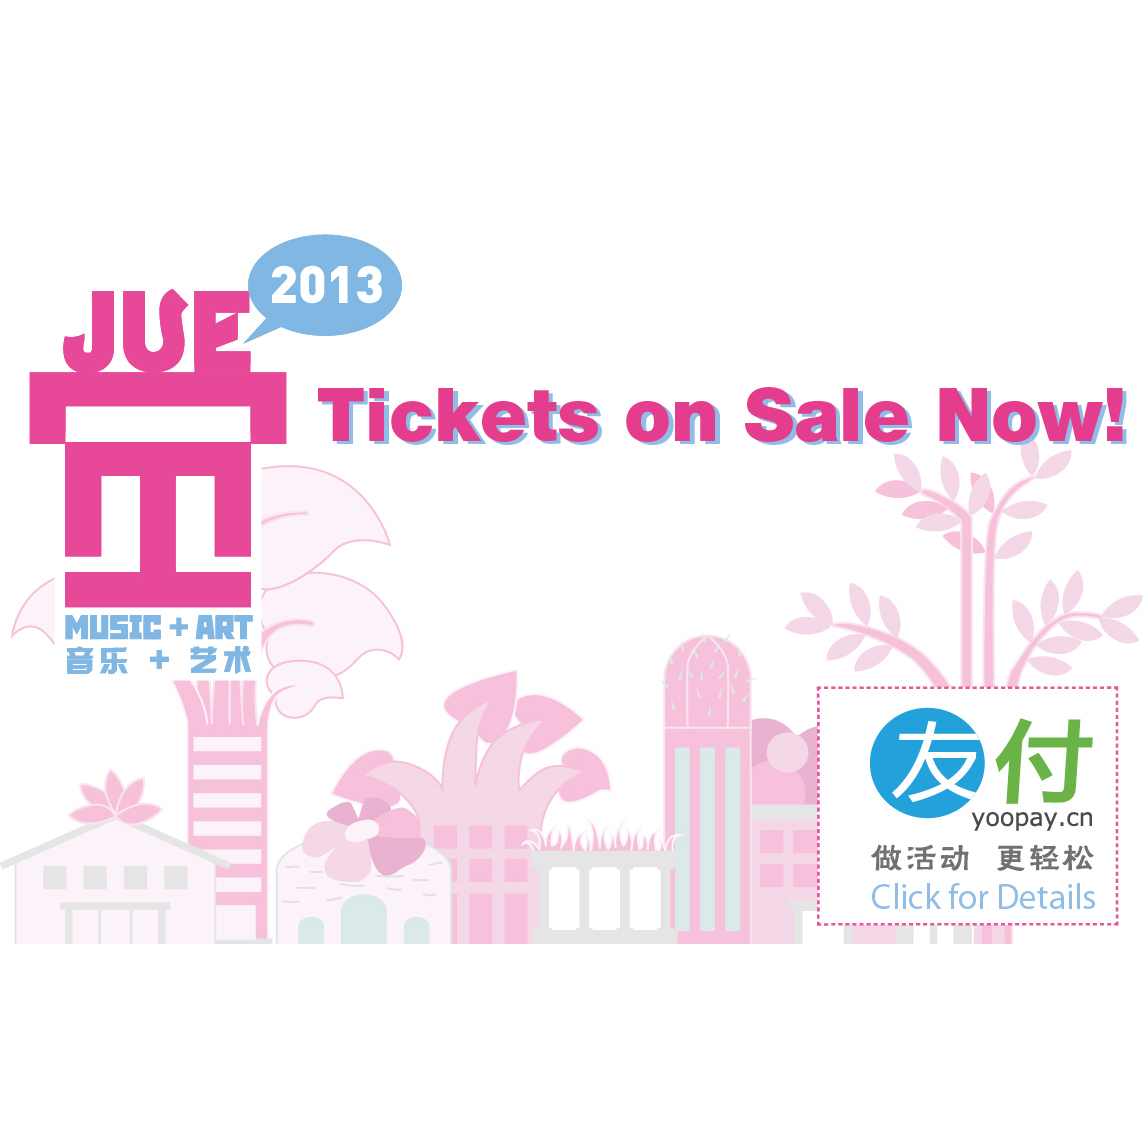 Presale Tickets Available for Select JUE | Music + Art 2013 Events!